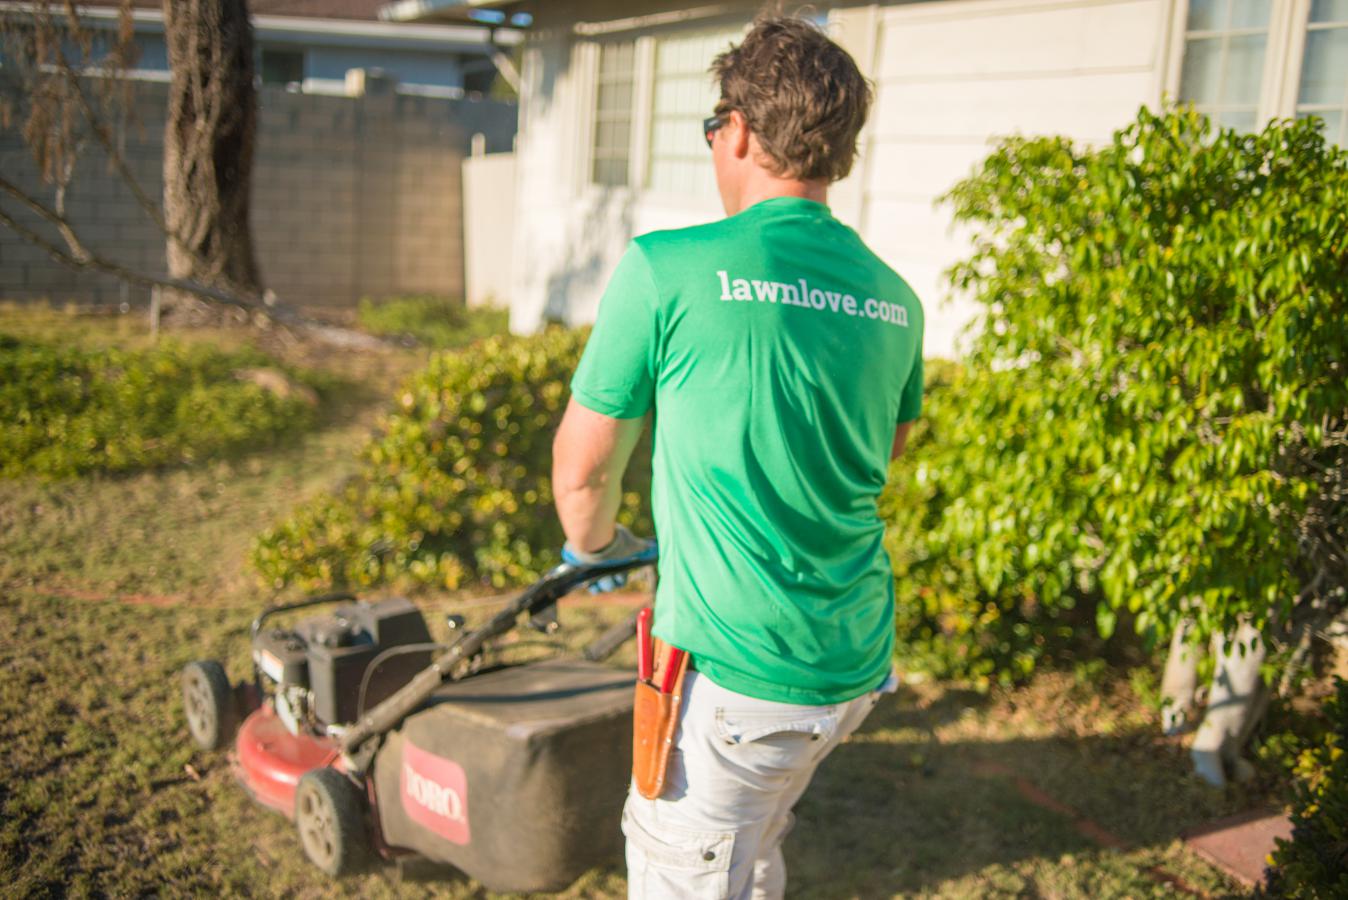 A digital marketplace for lawn care and gardening services